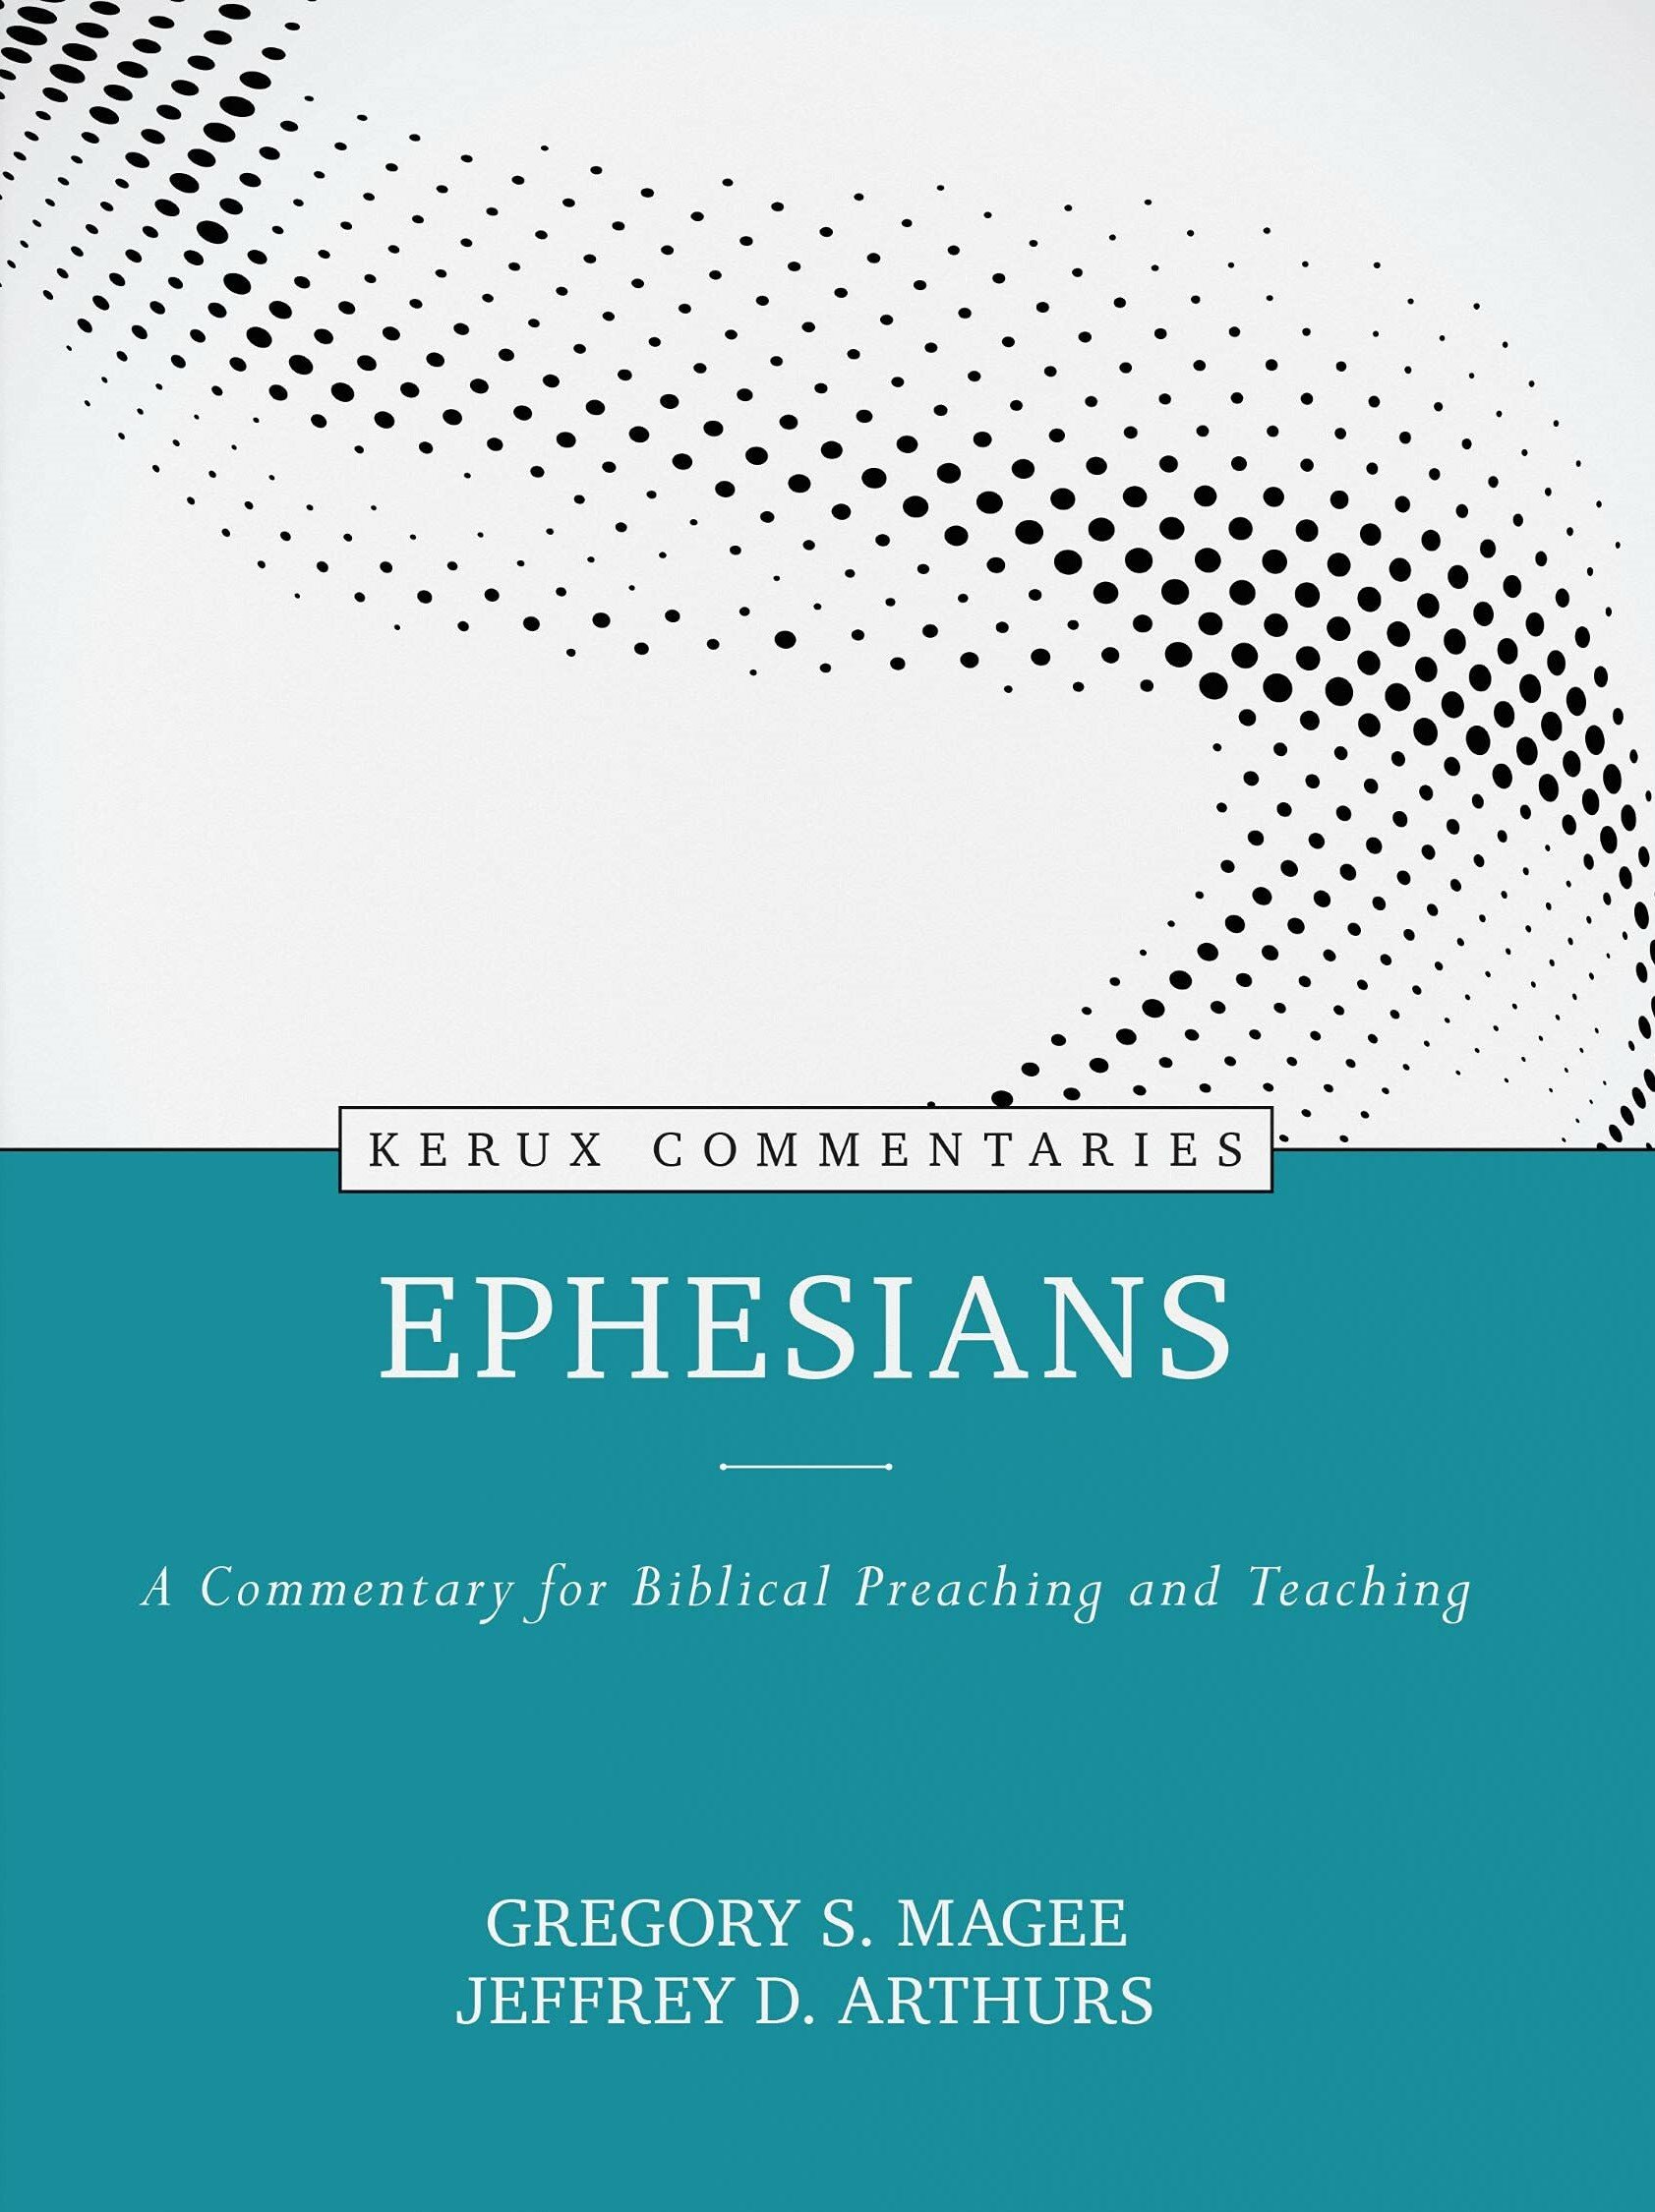 Ephesians: A Commentary for Biblical Preaching and Teaching (Kerux Commentaries)